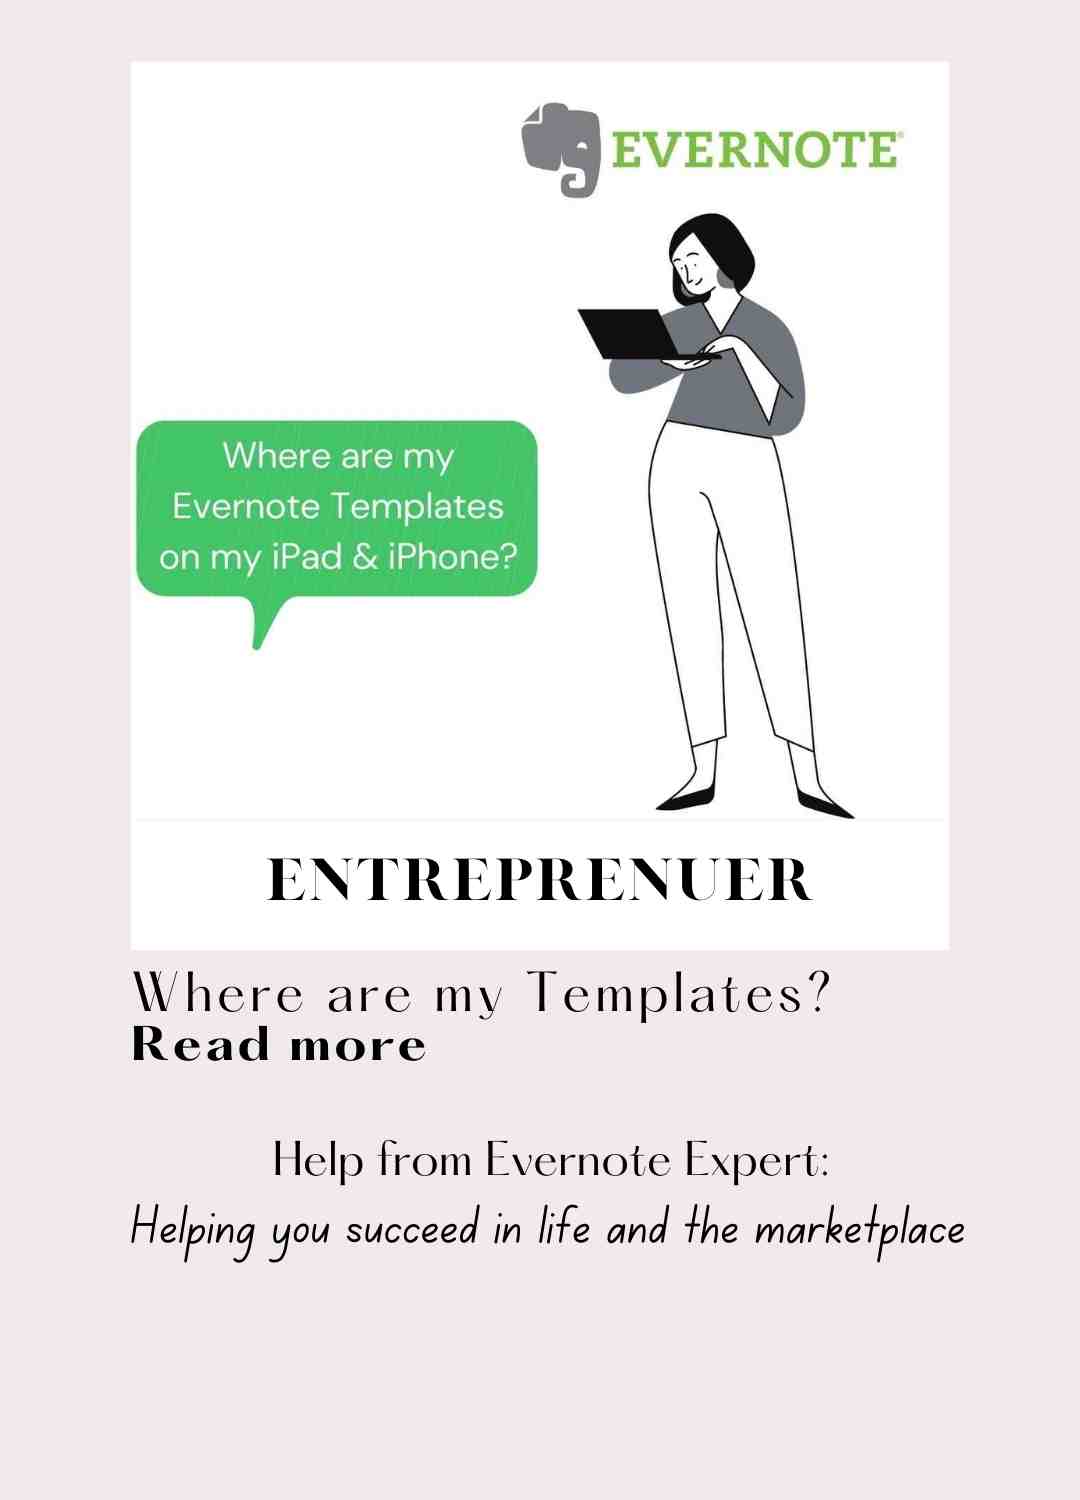 Where are my Evernote Templates on my iOS device?